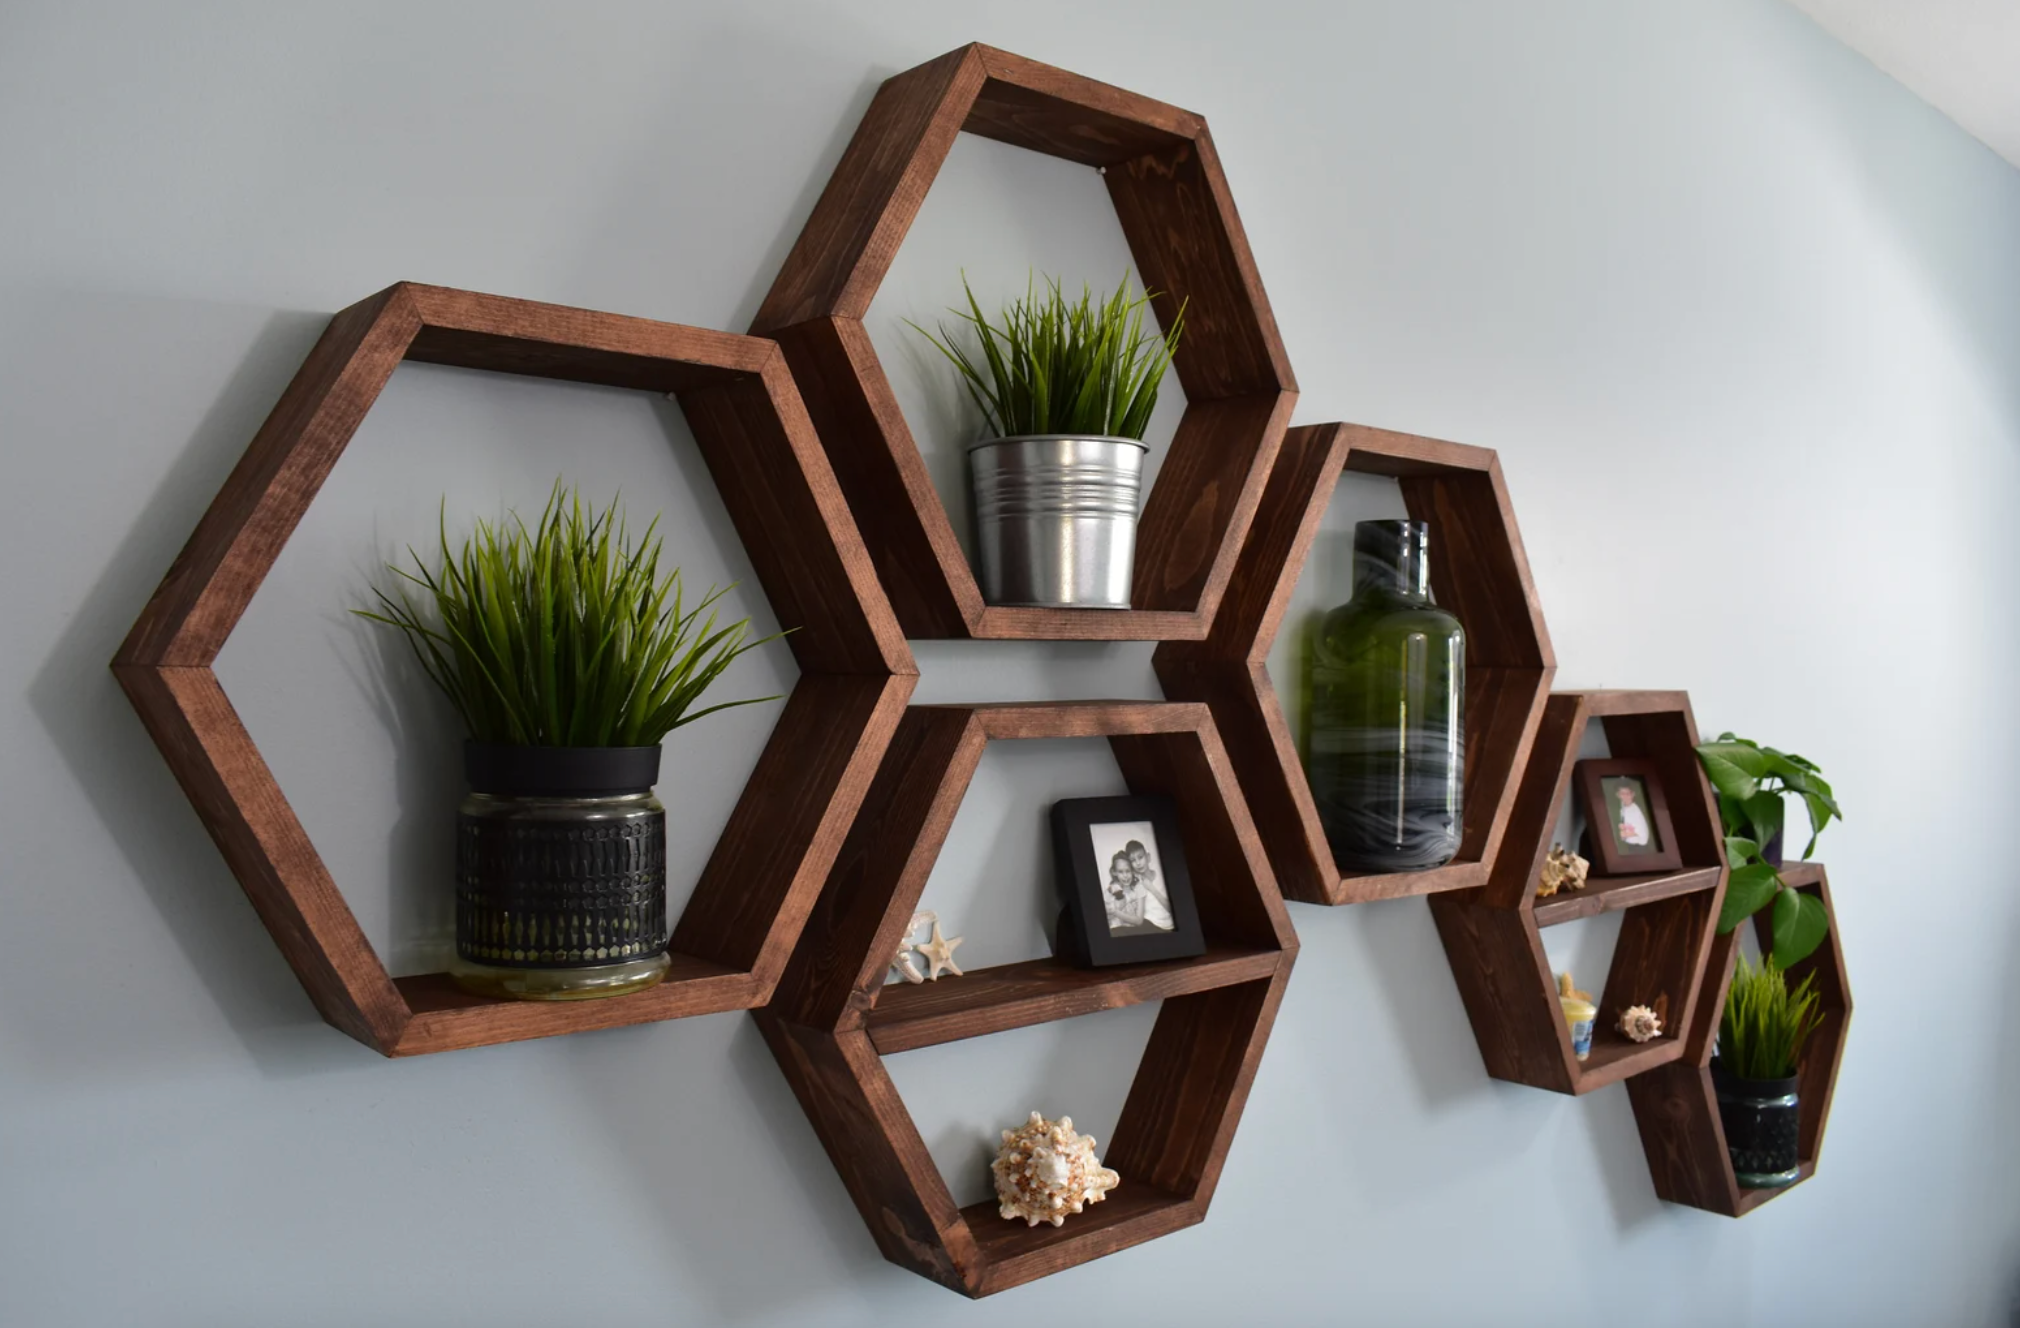 hexagon shelves on wall holding various items like plants, picture frames, and small pieces of decor